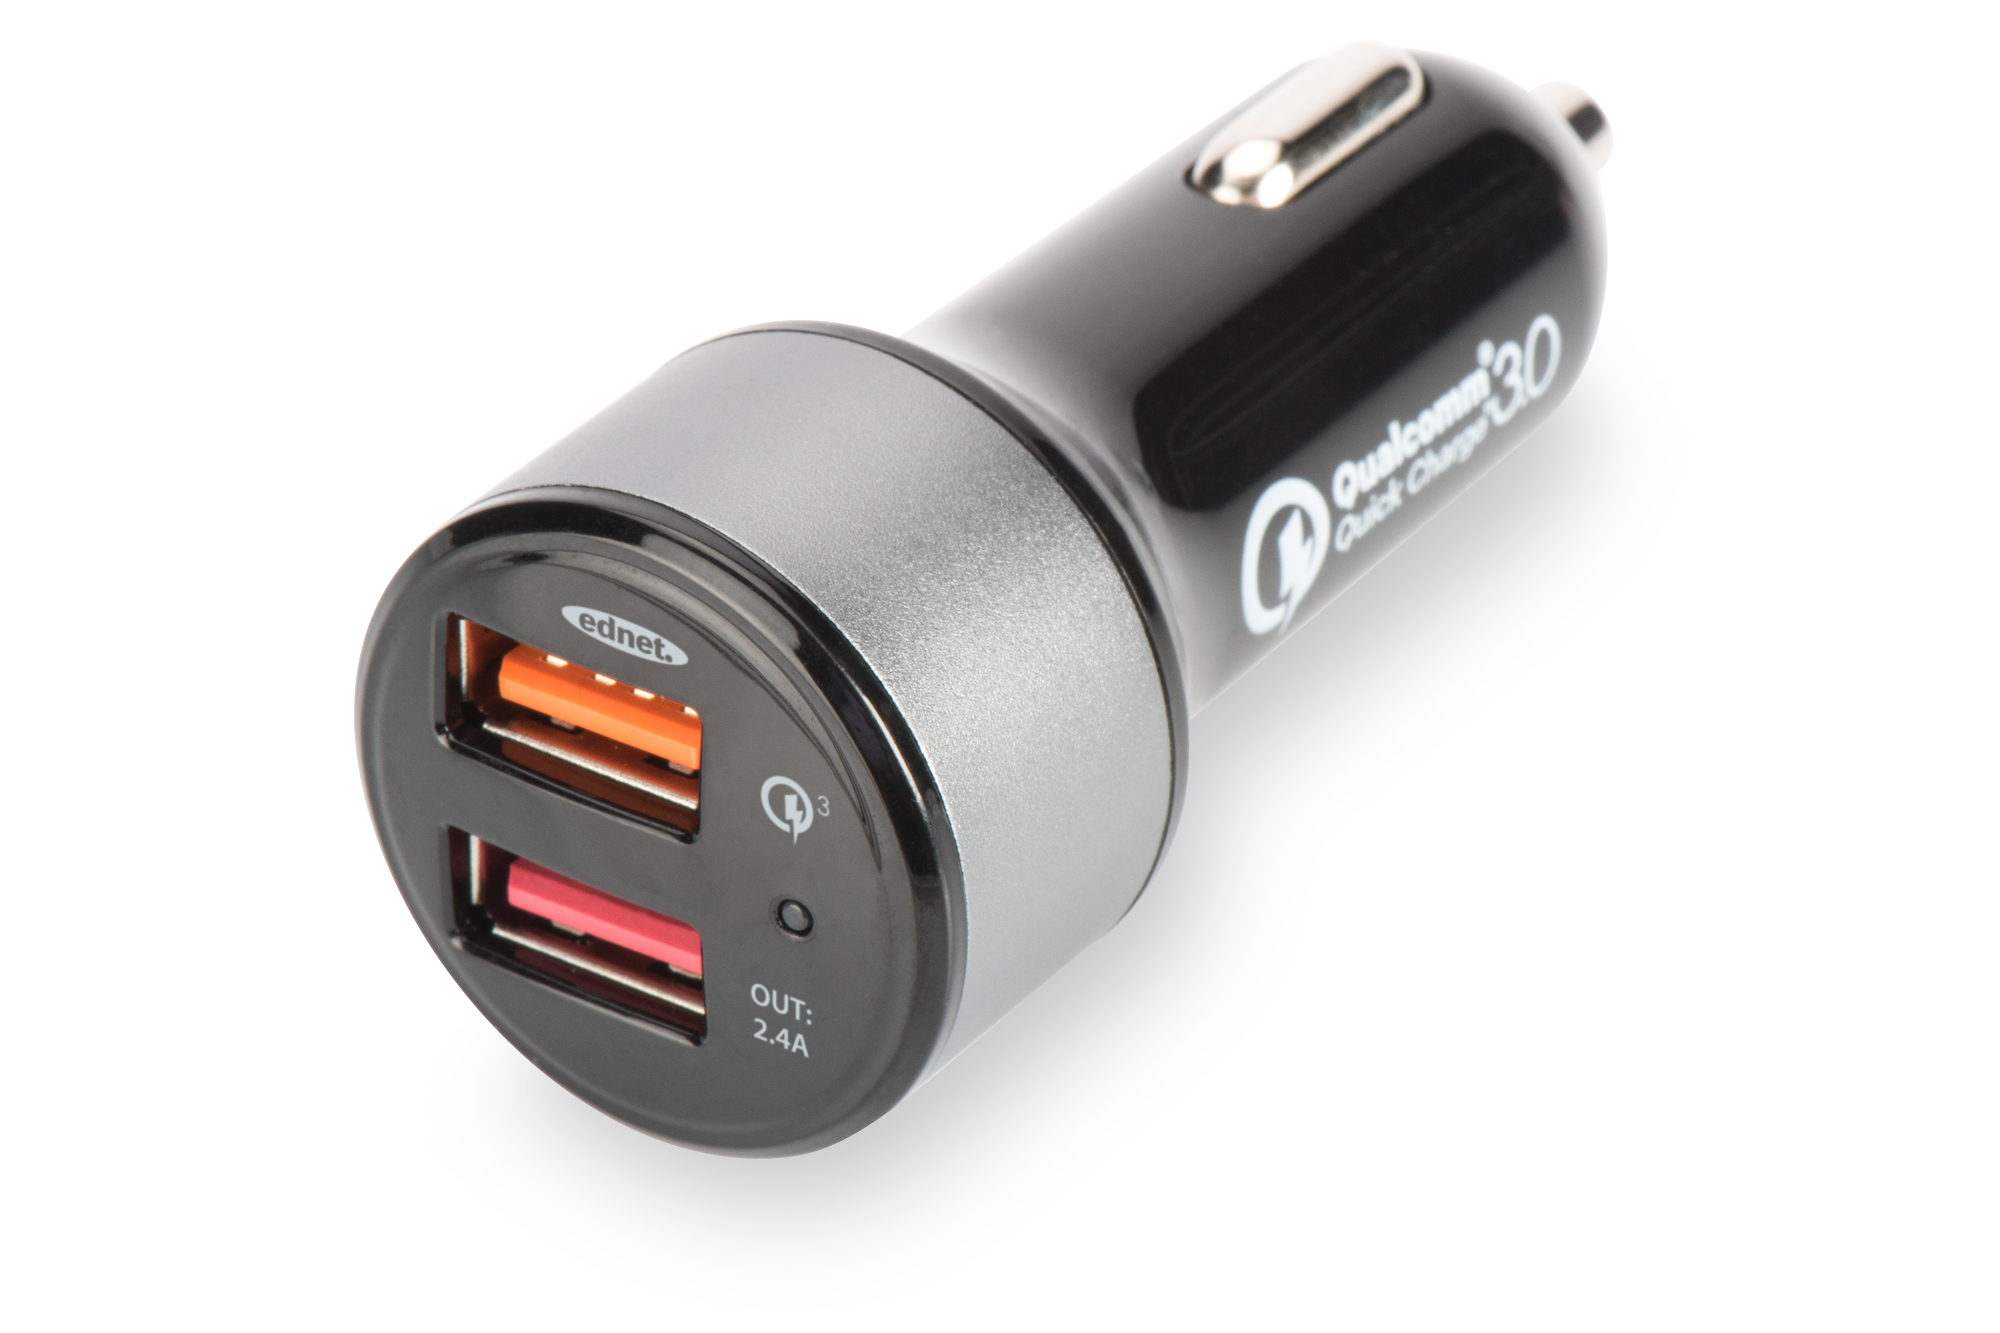 ednet - Quick Charge 3.0 Car Charging Adapter - Car - Dual Port